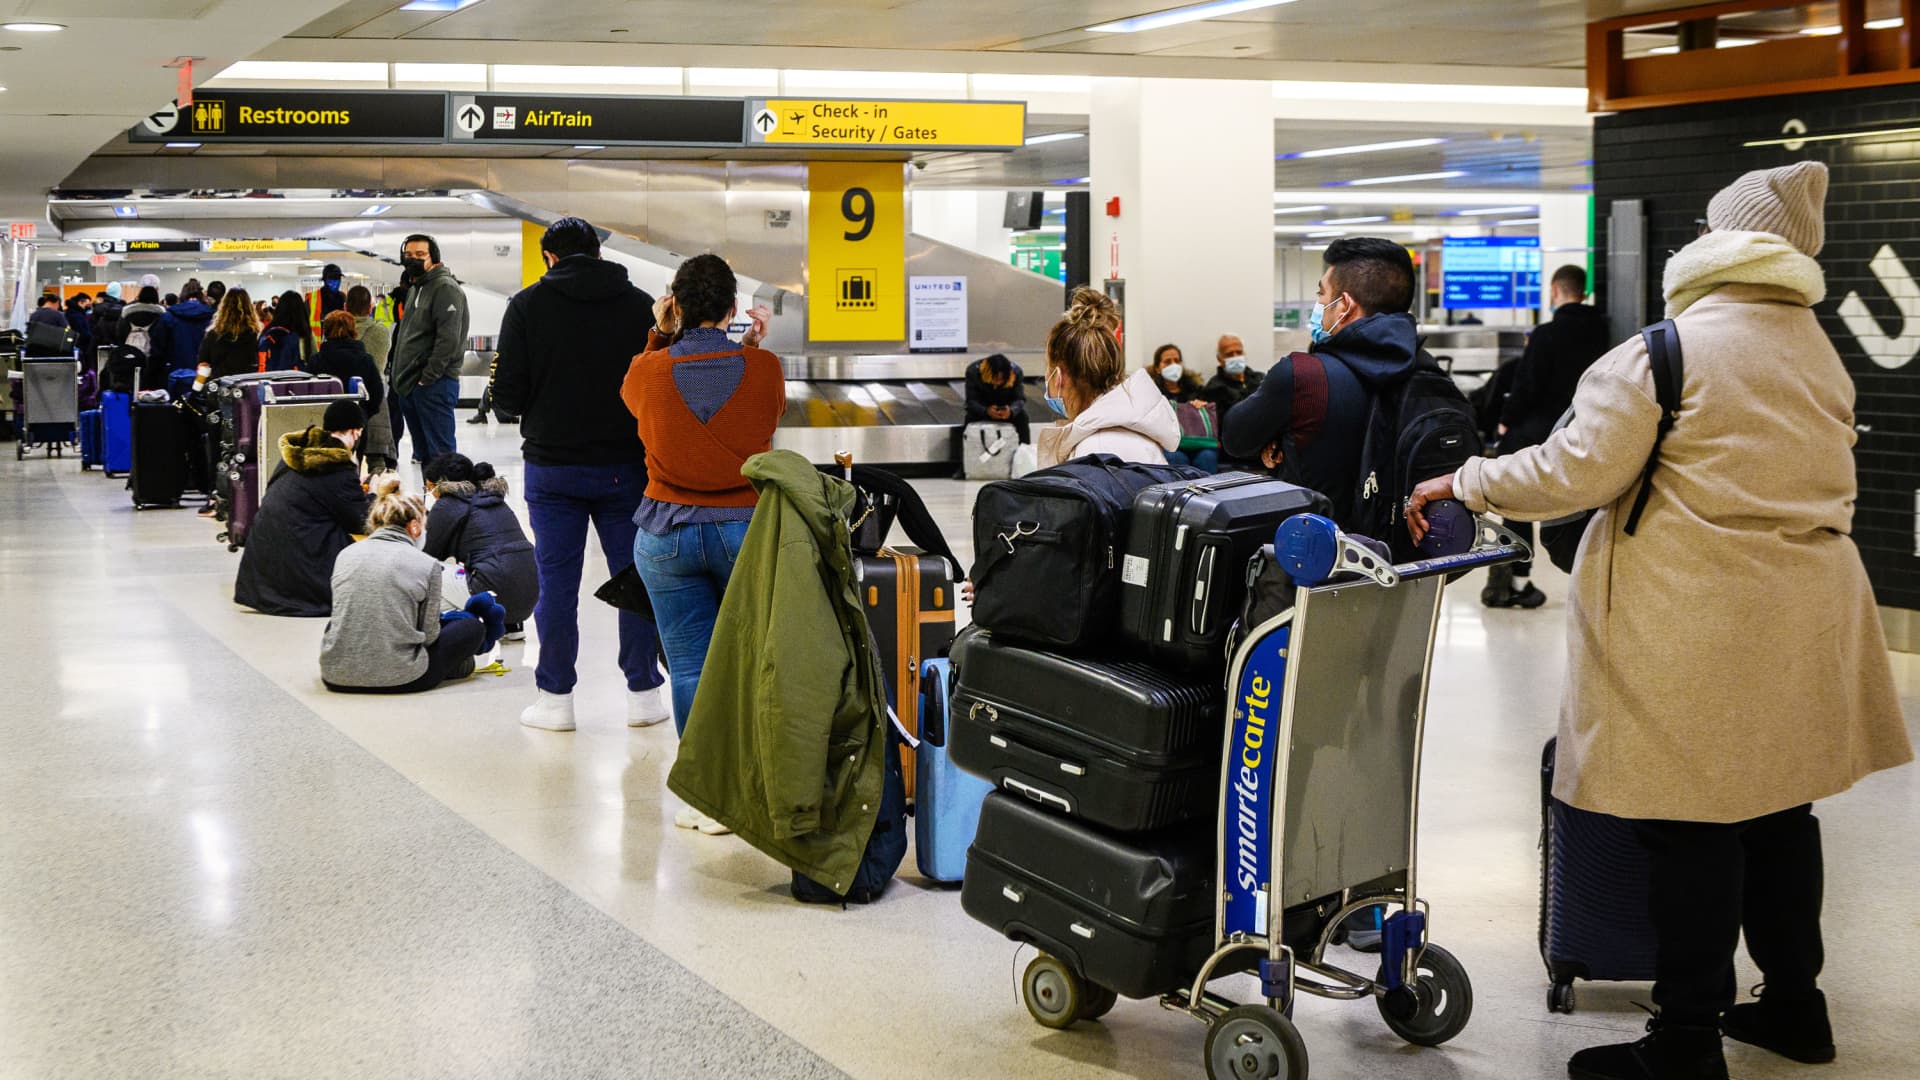 Traveler satisfaction is down as planes fill up and airfare rises, survey finds